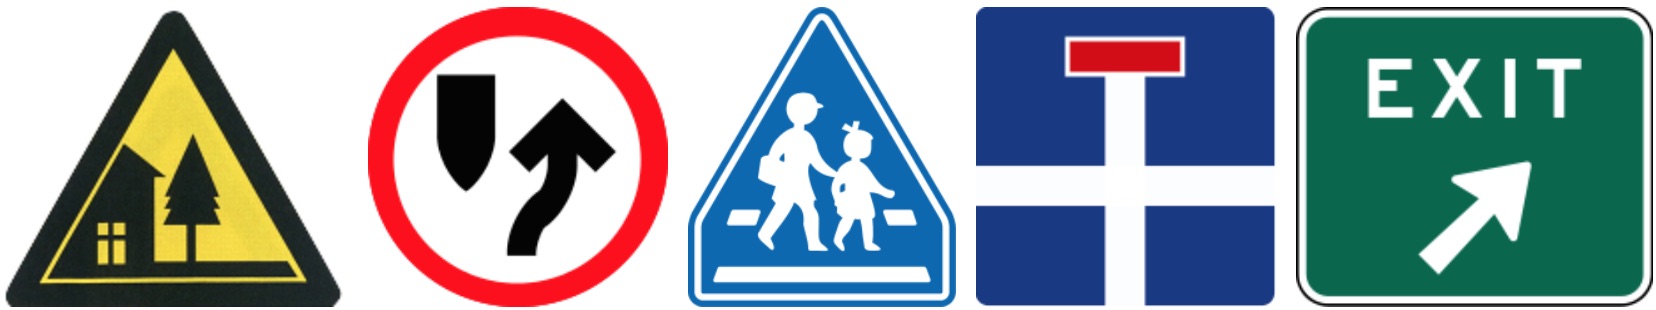 Traffic sign examples